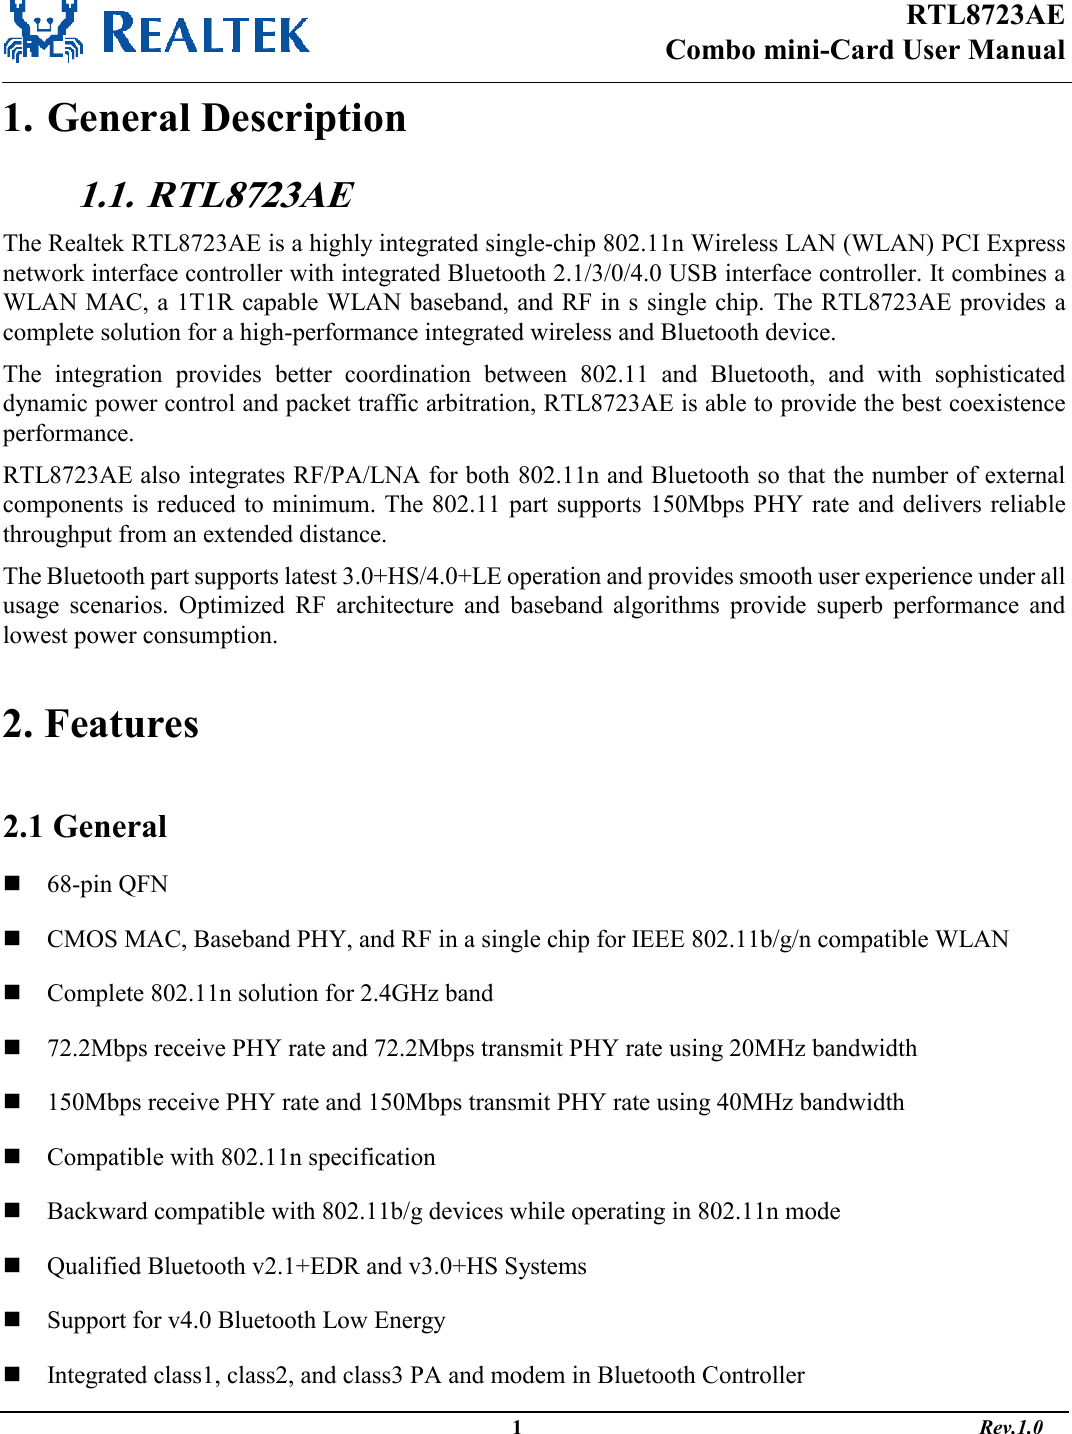 RTL8723AE Combo mini-Card User Manual                                                                                                  1                                                                                       Rev.1.0  1. General Description 1.1.  RTL8723AE The Realtek RTL8723AE is a highly integrated single-chip 802.11n Wireless LAN (WLAN) PCI Express network interface controller with integrated Bluetooth 2.1/3/0/4.0 USB interface controller. It combines a WLAN MAC, a 1T1R capable WLAN baseband, and RF in s single chip.  The RTL8723AE provides  a complete solution for a high-performance integrated wireless and Bluetooth device.  The  integration  provides  better  coordination  between  802.11  and  Bluetooth,  and  with  sophisticated dynamic power control and packet traffic arbitration, RTL8723AE is able to provide the best coexistence performance.  RTL8723AE also integrates RF/PA/LNA for both 802.11n and Bluetooth so that the number of external components is reduced to minimum. The 802.11 part supports 150Mbps PHY rate and delivers reliable throughput from an extended distance.  The Bluetooth part supports latest 3.0+HS/4.0+LE operation and provides smooth user experience under all usage  scenarios.  Optimized  RF  architecture  and  baseband  algorithms  provide  superb  performance  and lowest power consumption.   2. Features  2.1 General  68-pin QFN  CMOS MAC, Baseband PHY, and RF in a single chip for IEEE 802.11b/g/n compatible WLAN  Complete 802.11n solution for 2.4GHz band  72.2Mbps receive PHY rate and 72.2Mbps transmit PHY rate using 20MHz bandwidth  150Mbps receive PHY rate and 150Mbps transmit PHY rate using 40MHz bandwidth  Compatible with 802.11n specification  Backward compatible with 802.11b/g devices while operating in 802.11n mode  Qualified Bluetooth v2.1+EDR and v3.0+HS Systems  Support for v4.0 Bluetooth Low Energy  Integrated class1, class2, and class3 PA and modem in Bluetooth Controller 